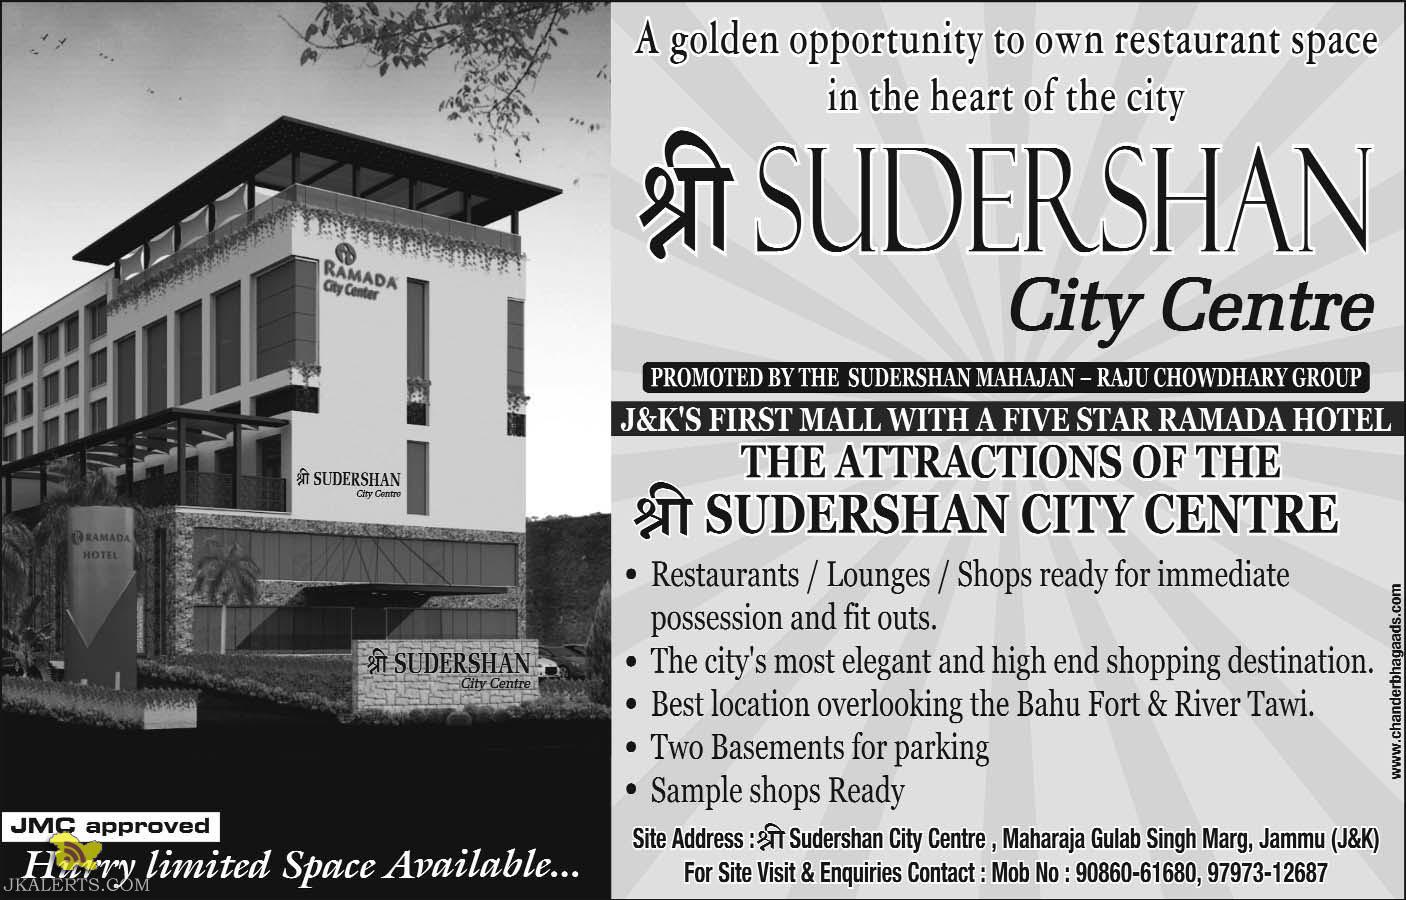 SUDERSHAN City Centre J&K'S FIRST MALL WITH A FIVE STAR RAMADA HOTEL